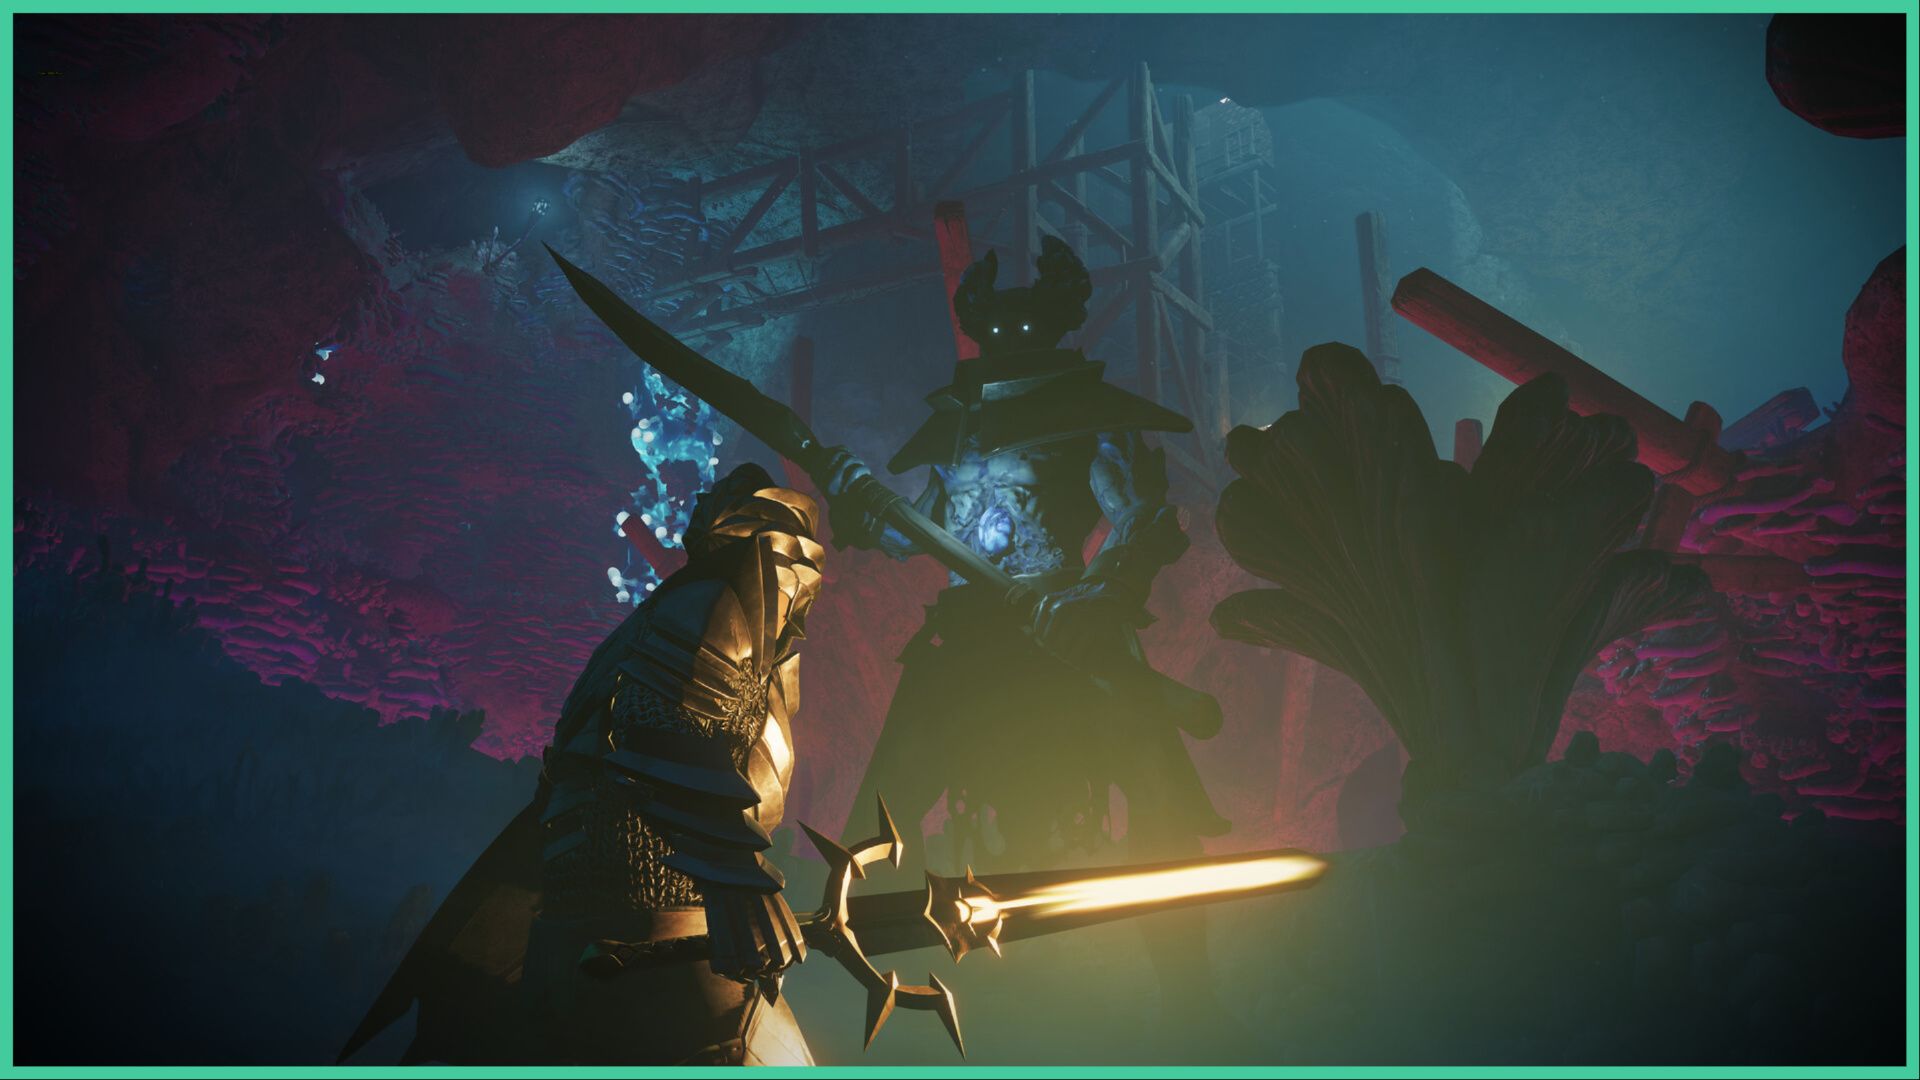 feature image for our enshrouded class tier list, the image features a promo screenshot for the game of a character wearing metal armour and holding a sword as they face a large creature who is holding a sharp spear with horns and glowing eyes, they seem to be inside some sort of cave, with glowing plants, and wooden beams in the background